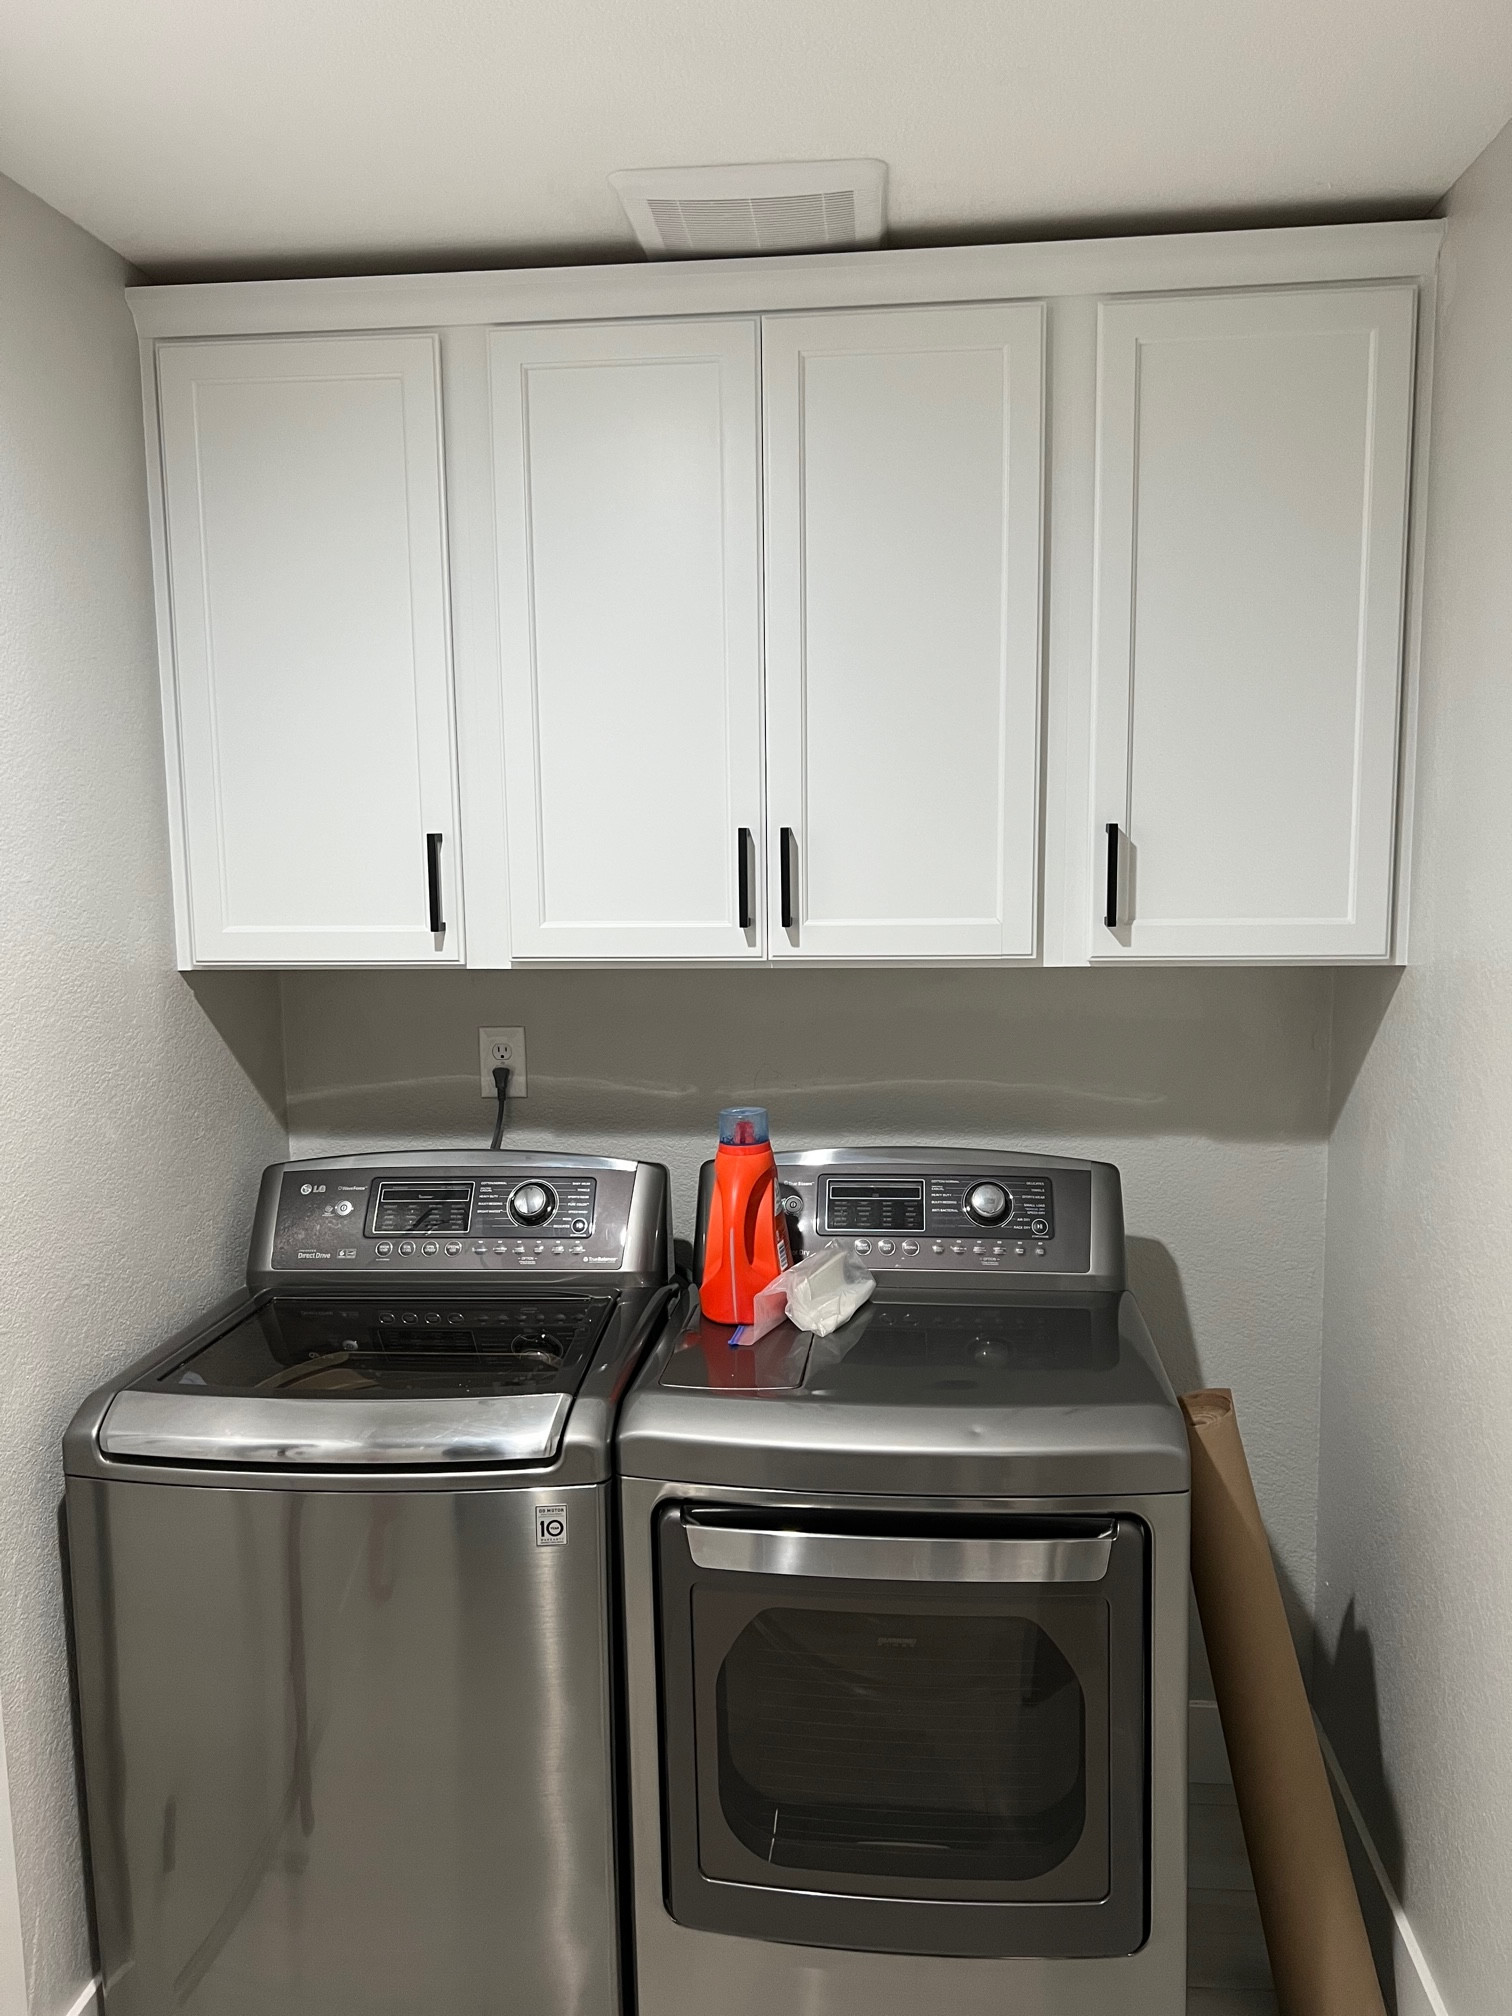 Kitchen and Baths Remodel - Build and Paint